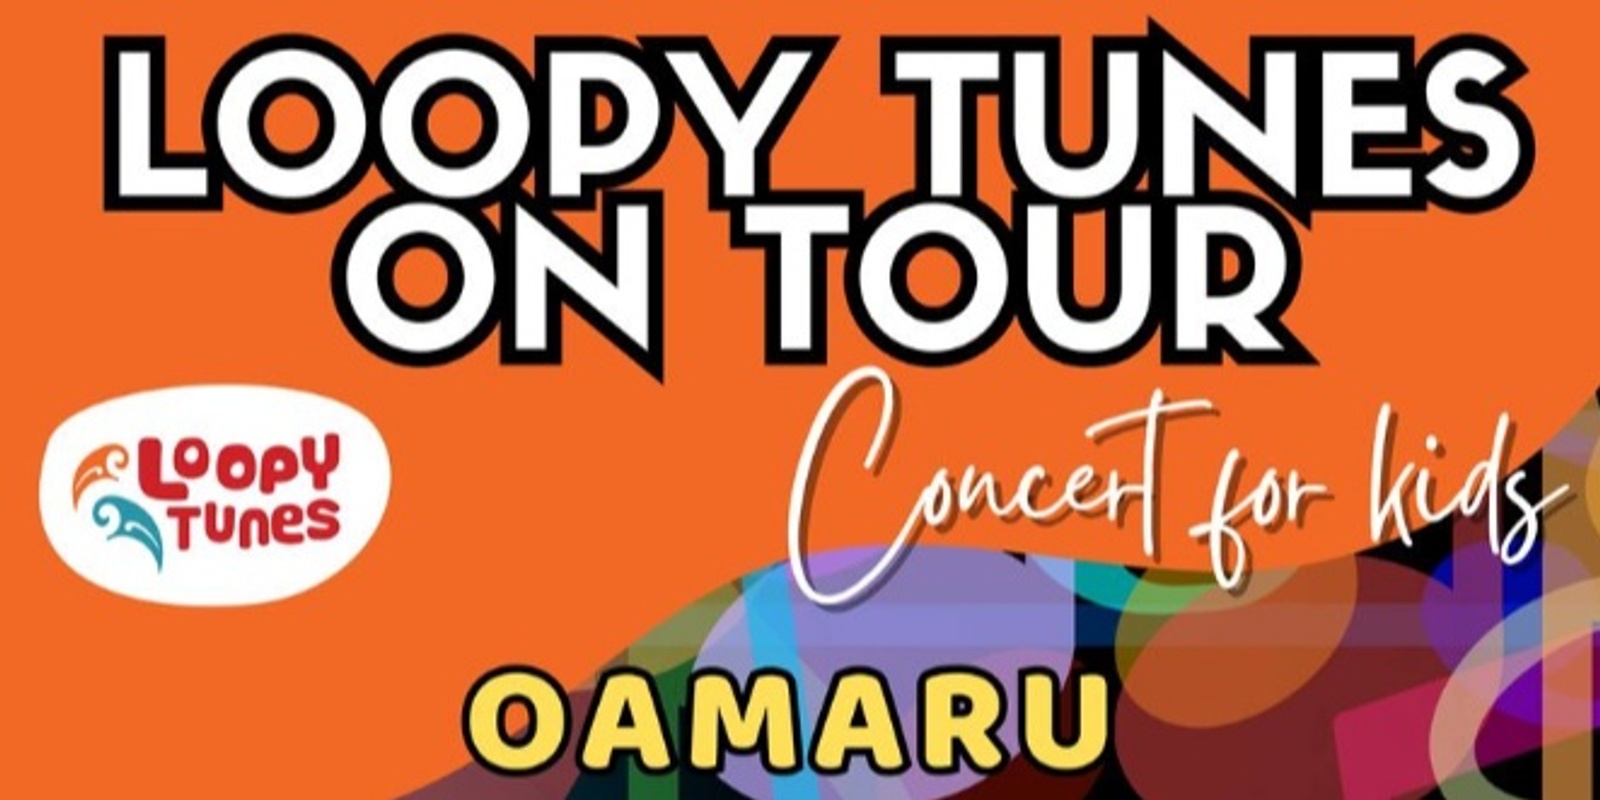 Banner image for Loopy Tunes on Tour Concert [Oamaru]